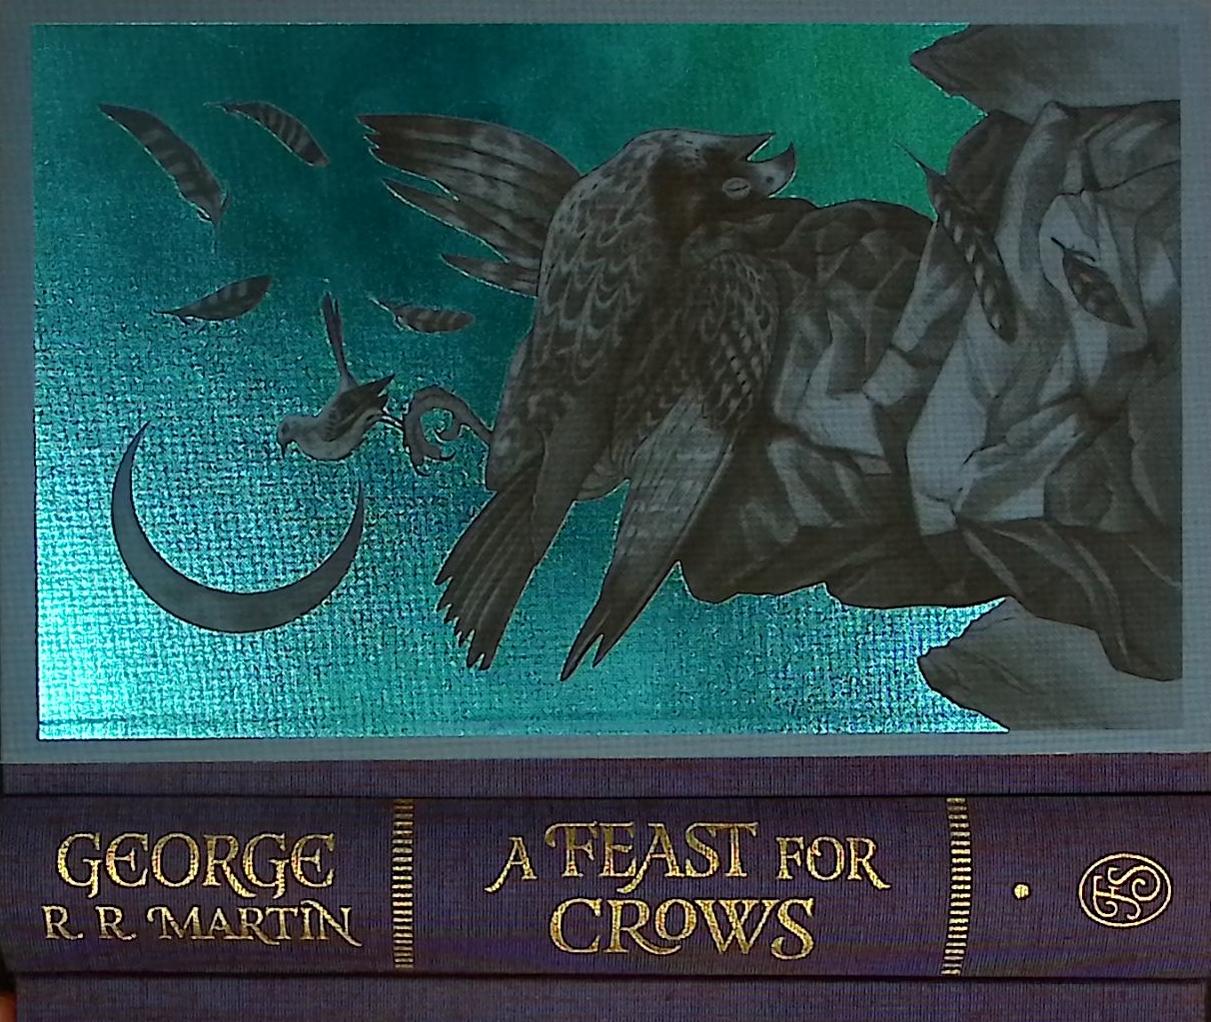 A Feast of Crows. 2 volume set. [A Song of Ice and Fire Book 4]